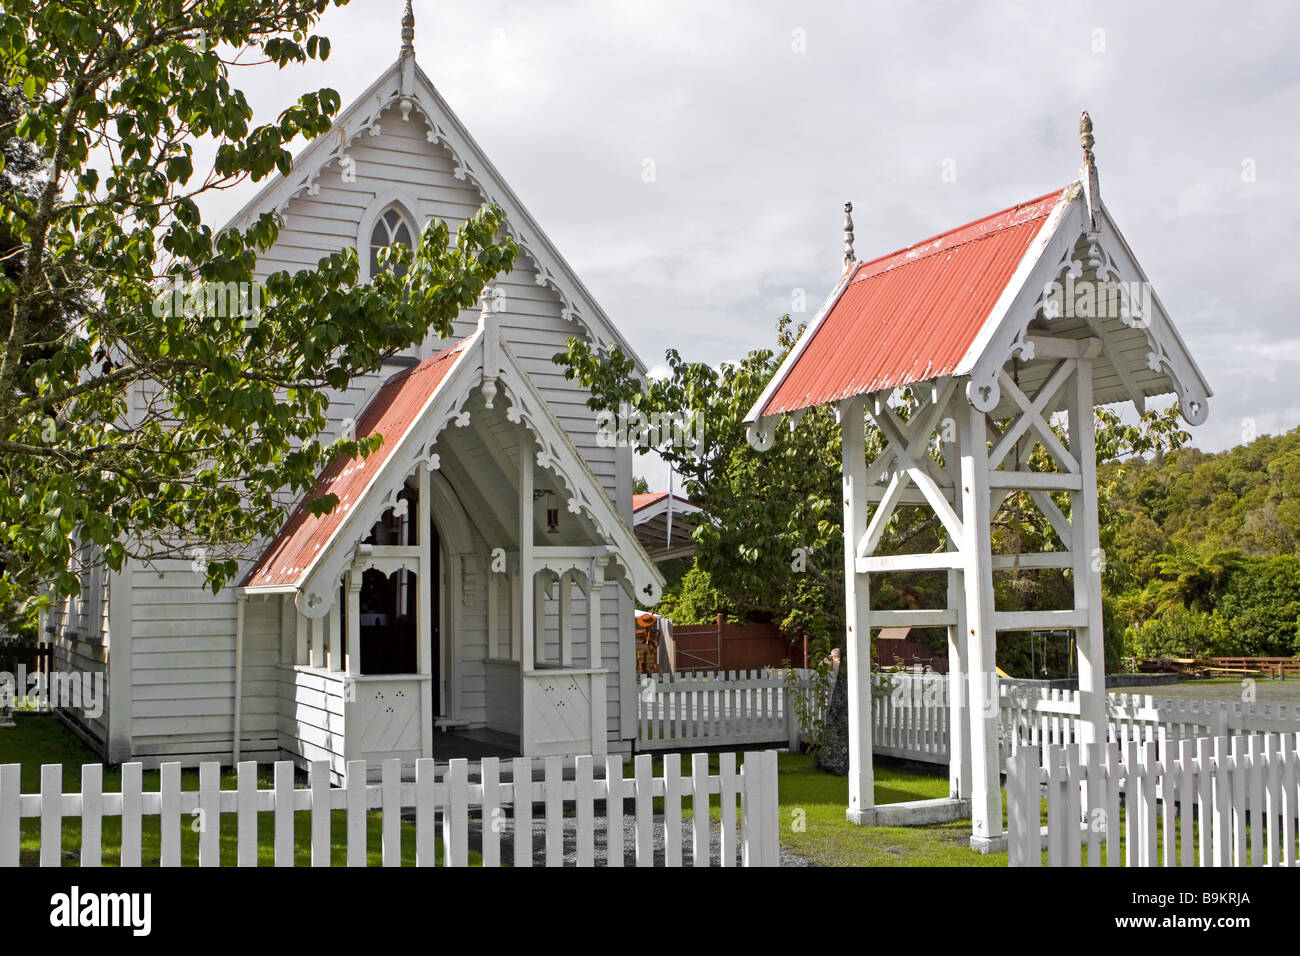 Small Rural Church in New Zealand Stock Photo